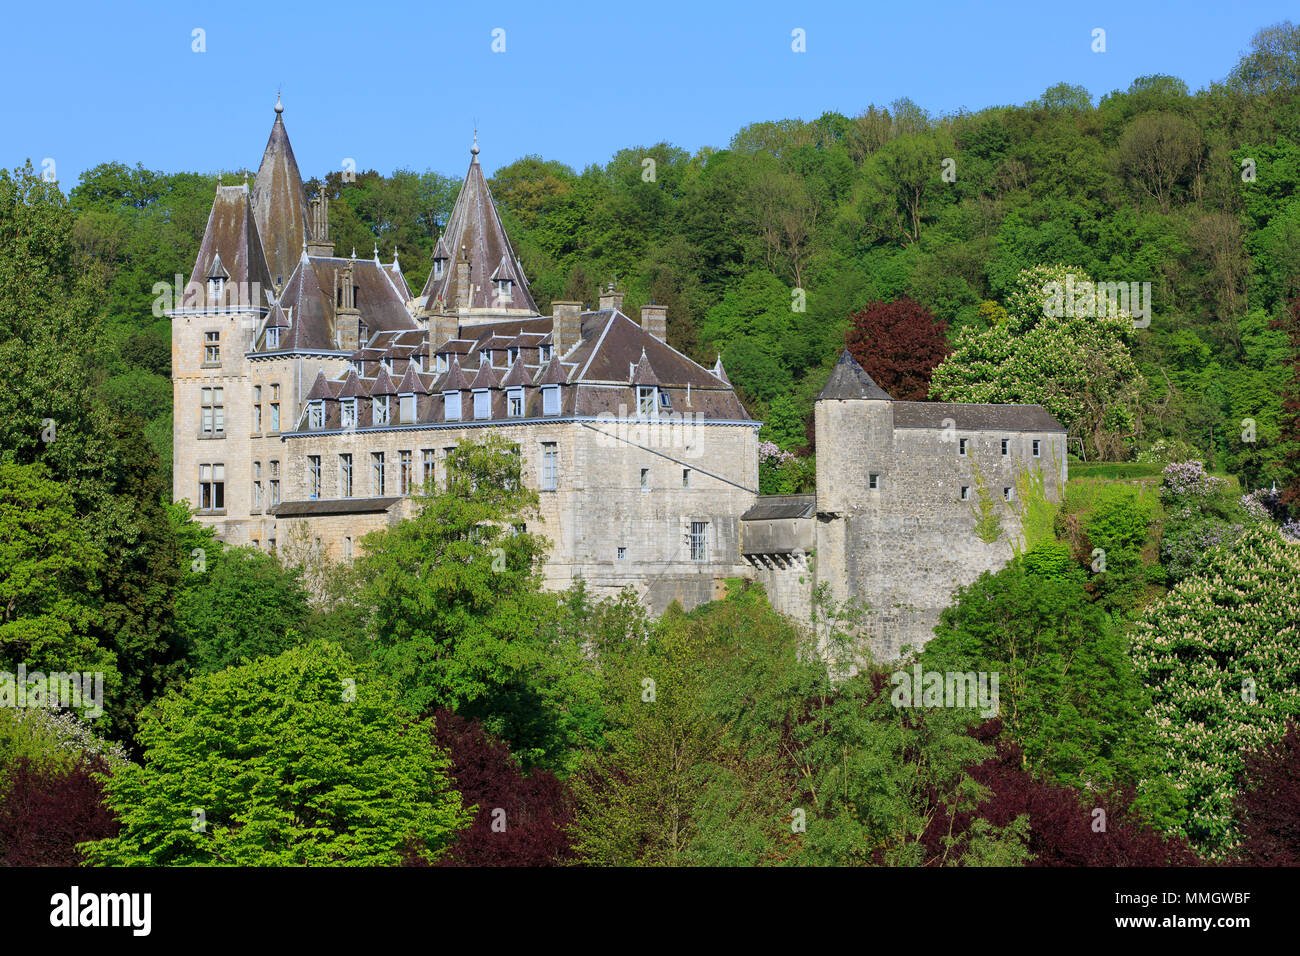 The castle of the Count of Ursel along the river Ourthe in Durbuy (province of Luxembourg), Belgum Stock Photo